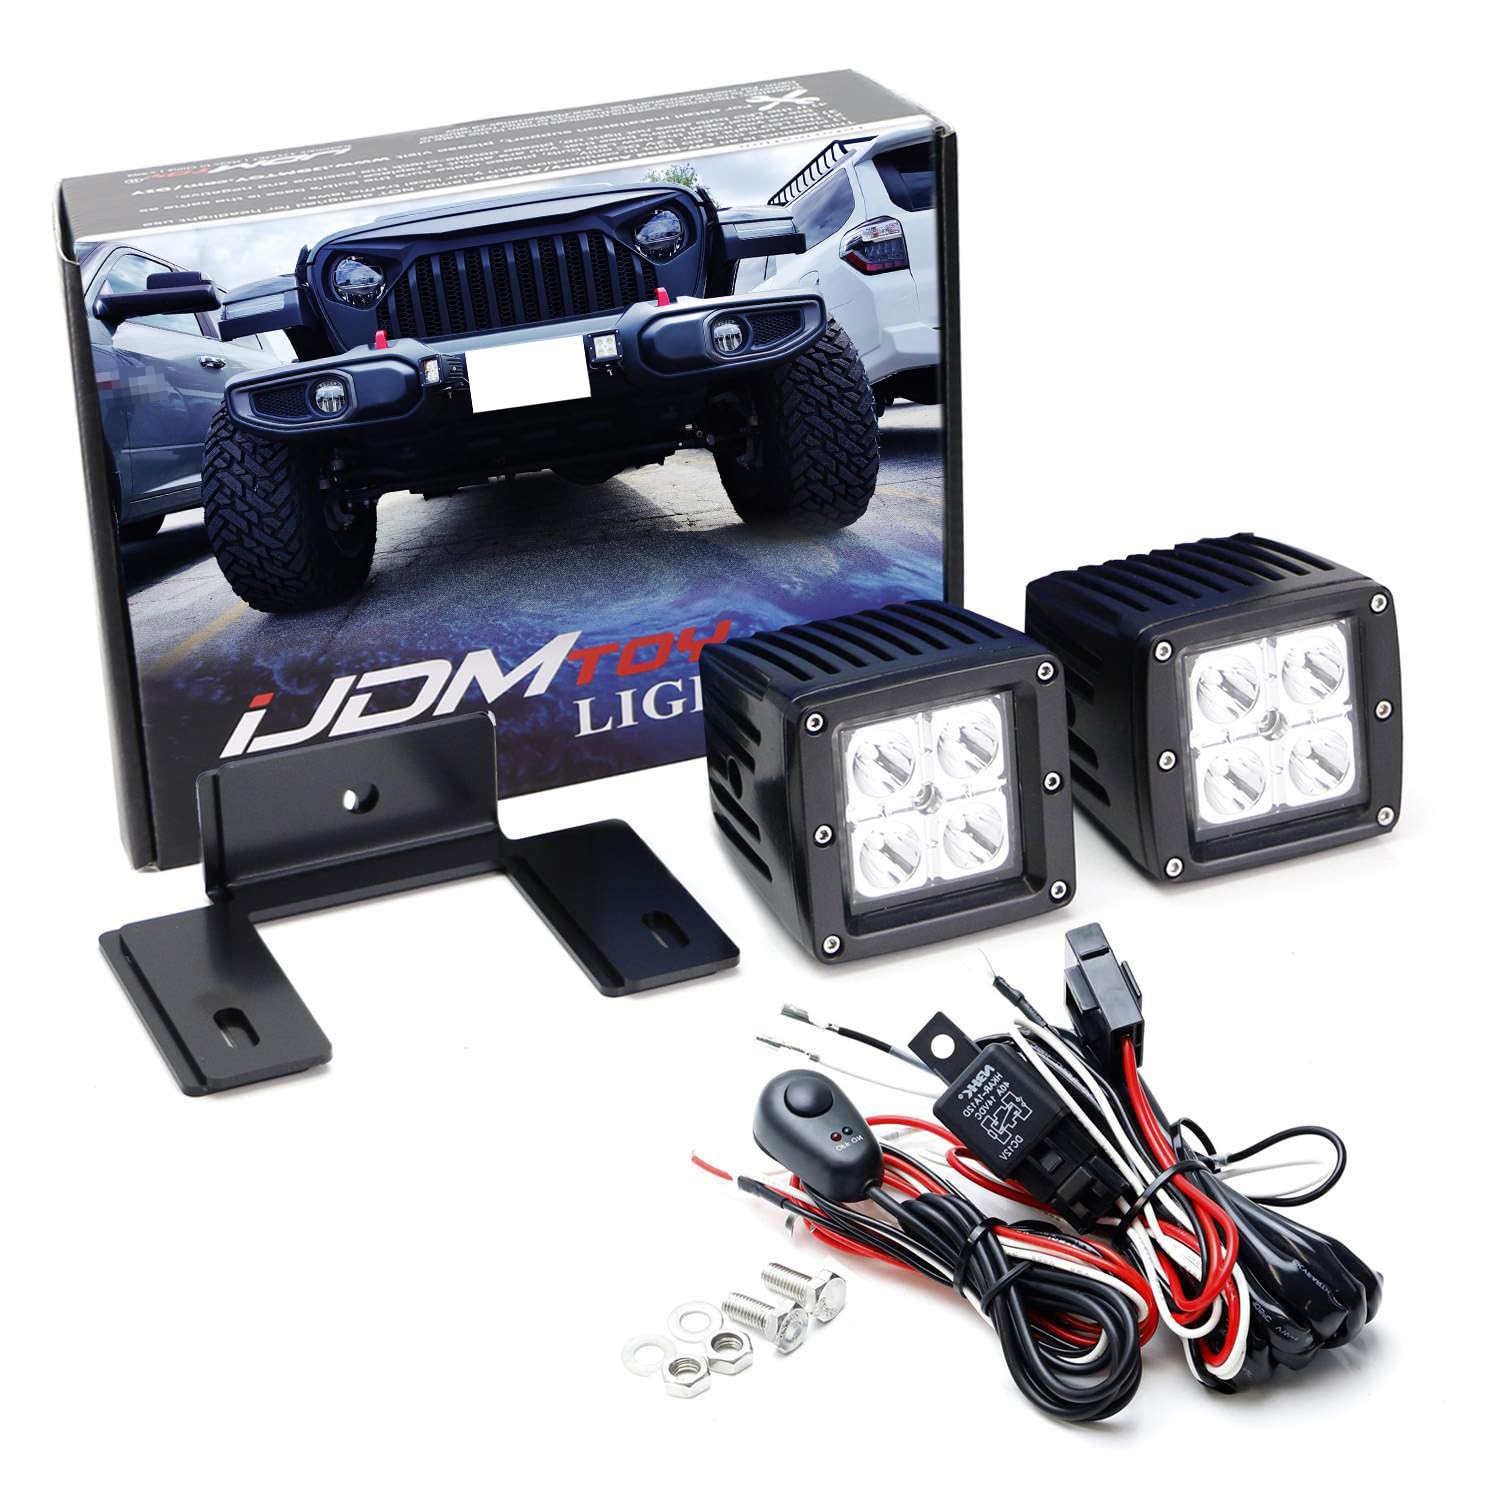 iJDMTOY Universal Fit License Plate Frame Mount 3-Inch LED Pod Fog Driving Light Kit, Include (2) 2x2 24W LED Cubic, Mounting Brackets & Relay Wiring Kit